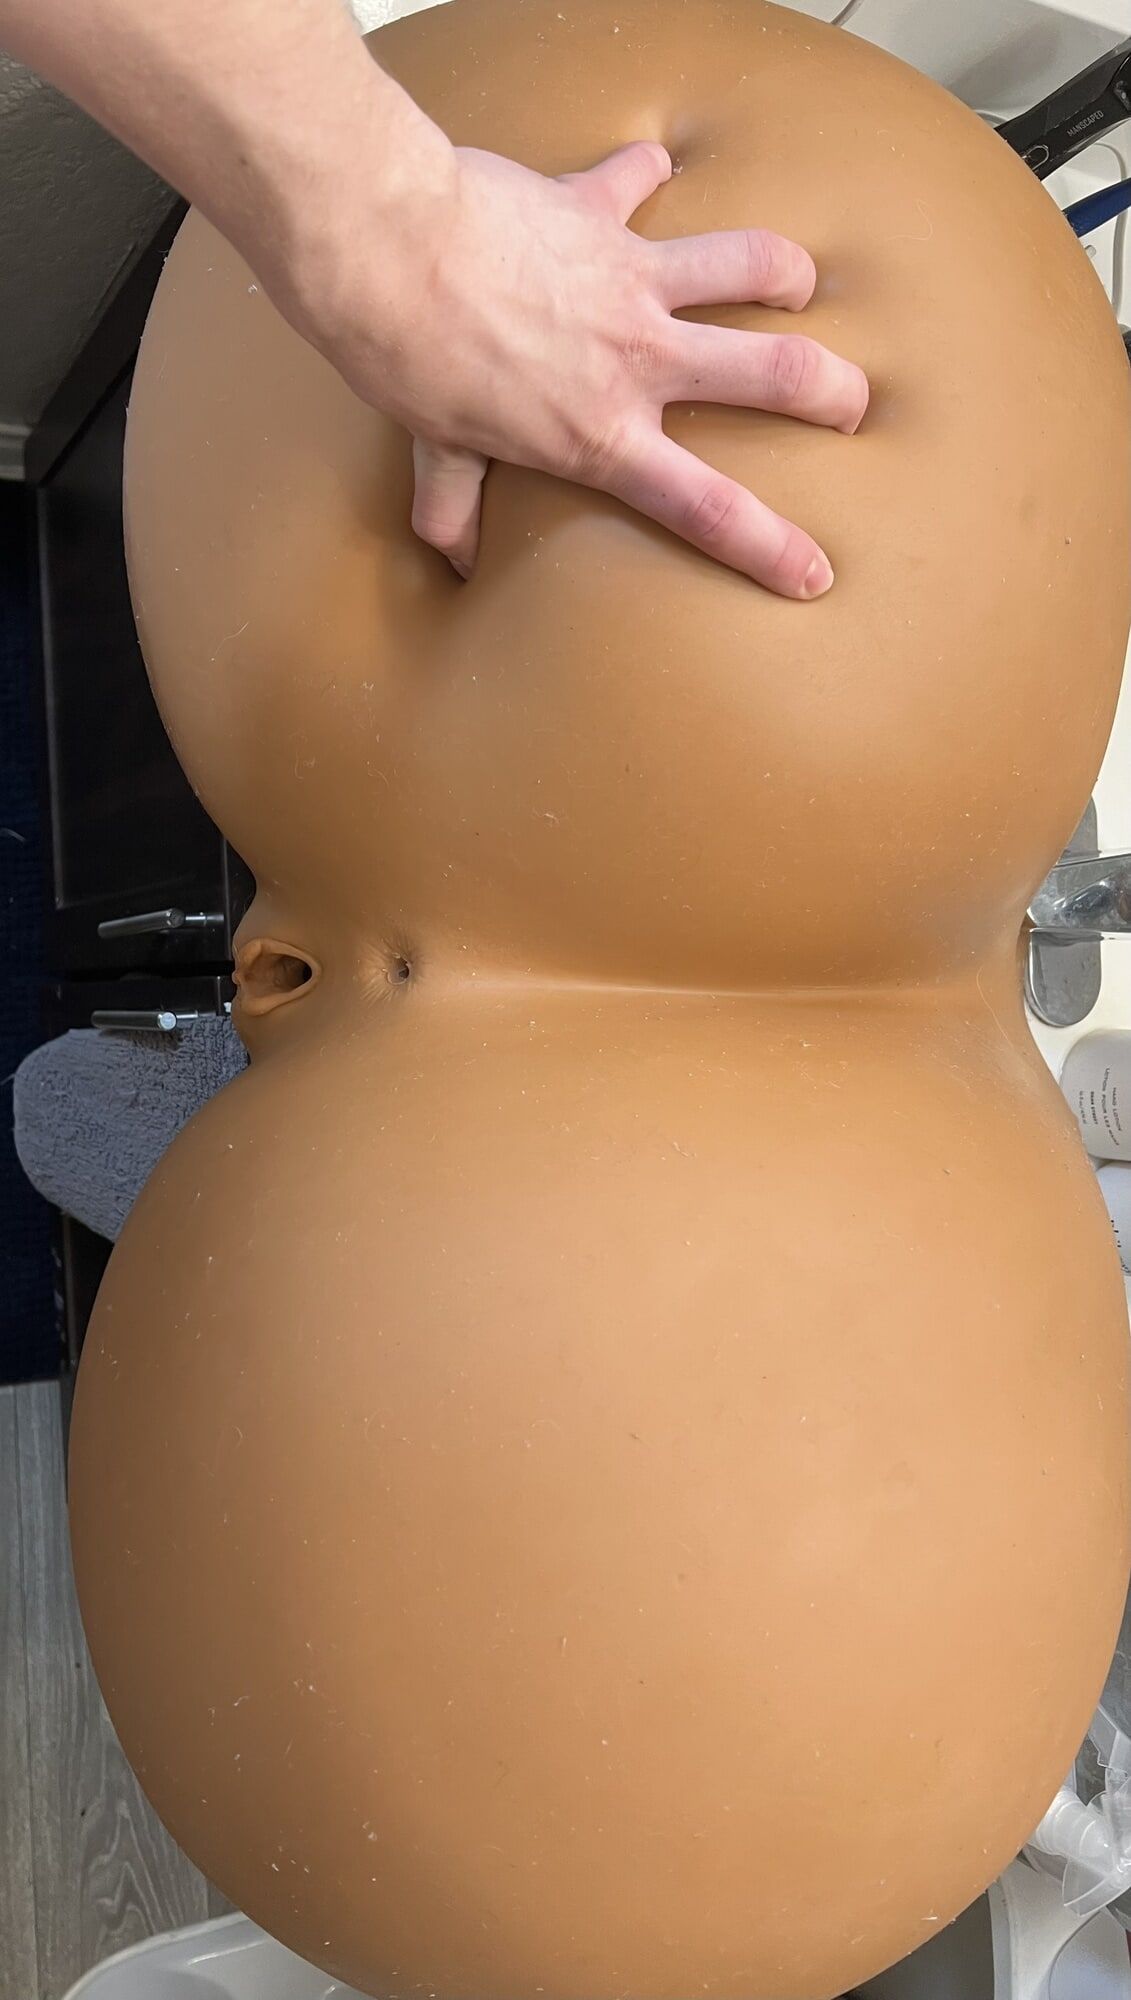 Showing Off the Immense Ass of the R3 CLM Sexdoll #7